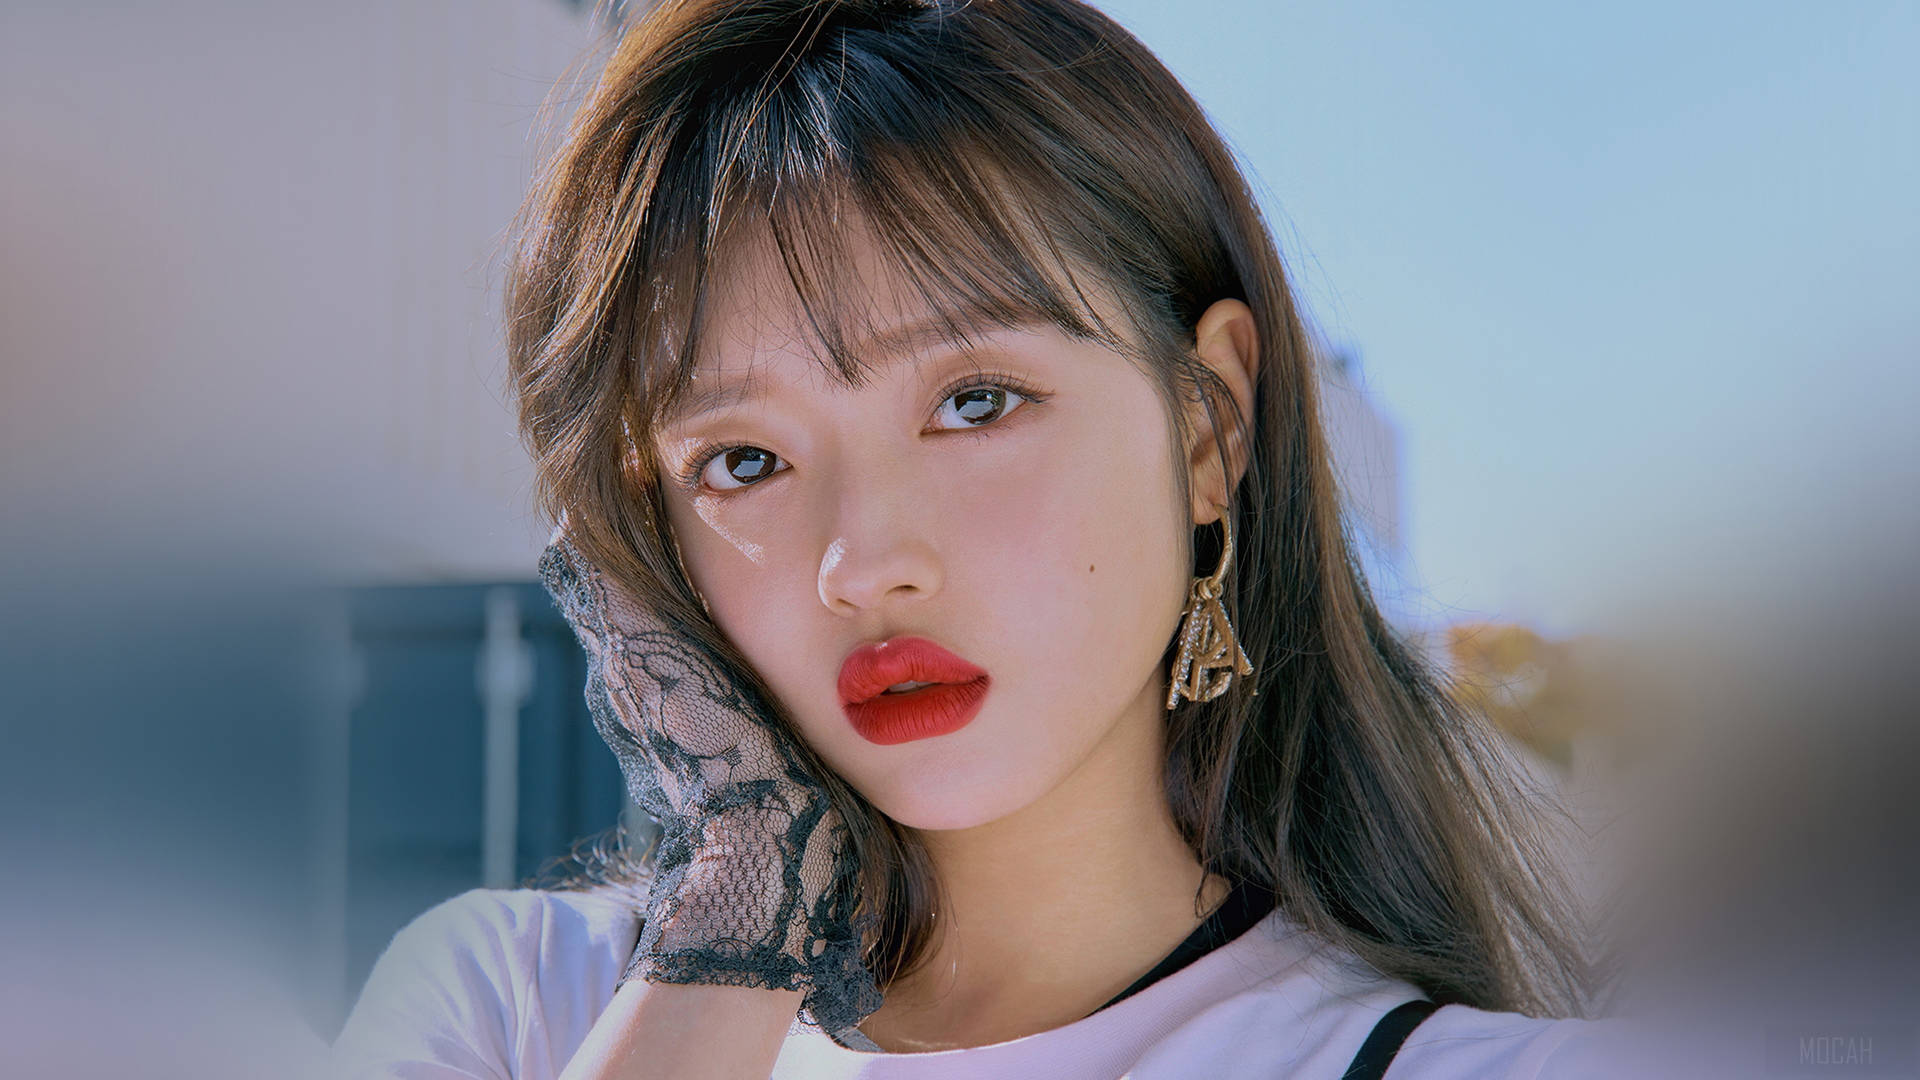 Elegance Redefined - Oh My Girl's Yooa In Red Lips